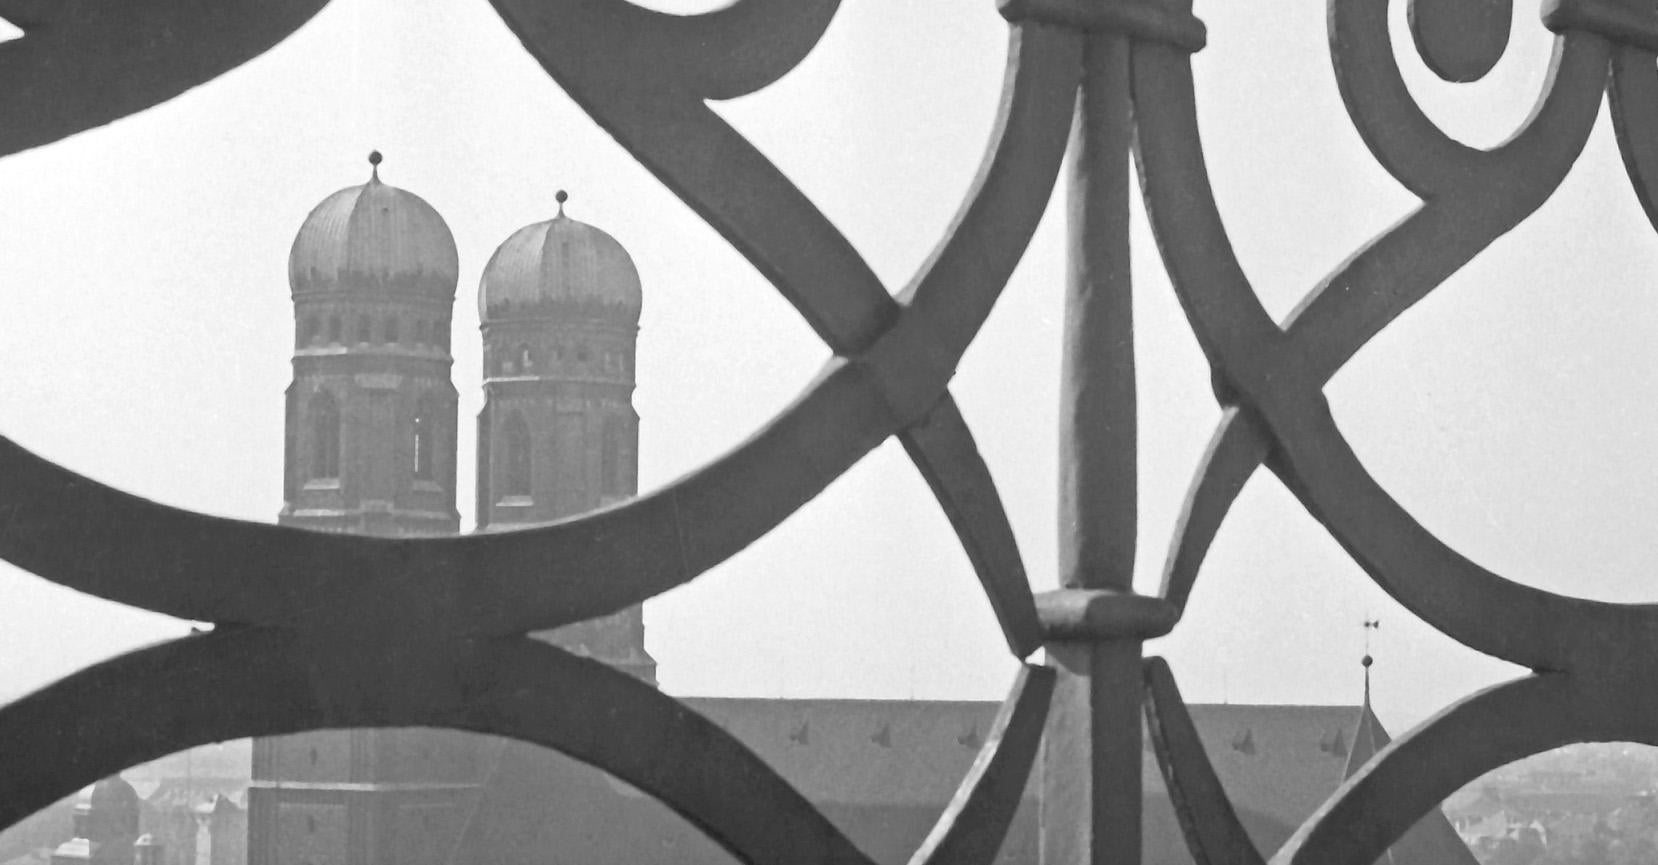 View to Munich Frauenkirche church with railing, Germany 1938, Printed Later - Photograph by Karl Heinrich Lämmel